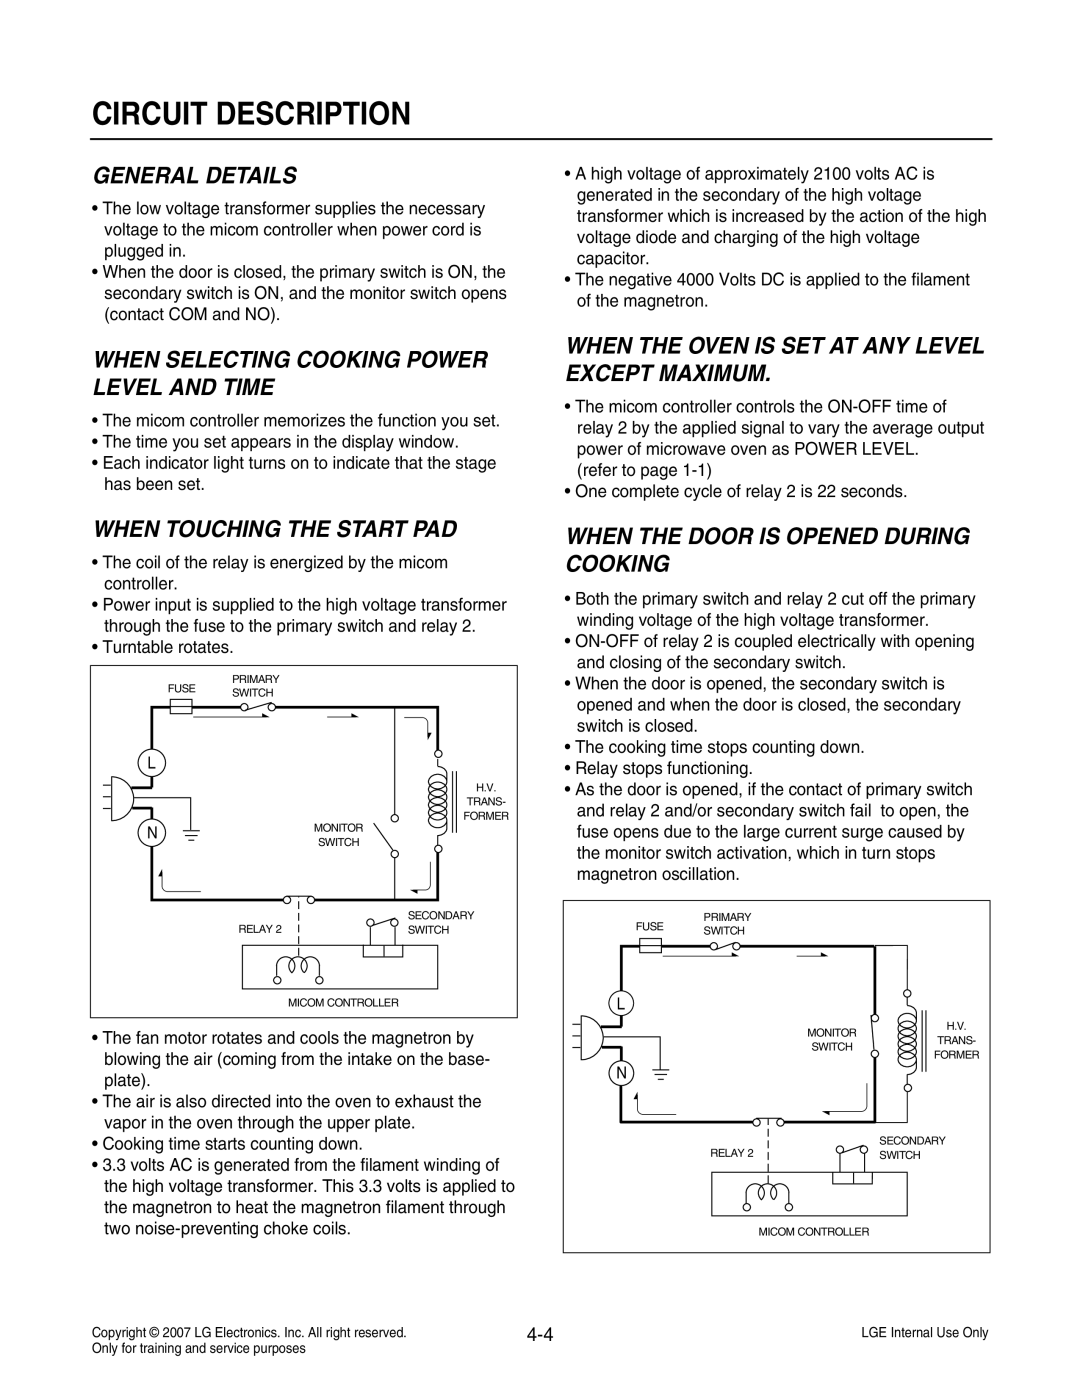 LG Electronics MS3447GRS service manual Circuit Description, General Details, When Selecting Cooking Power Level And Time 